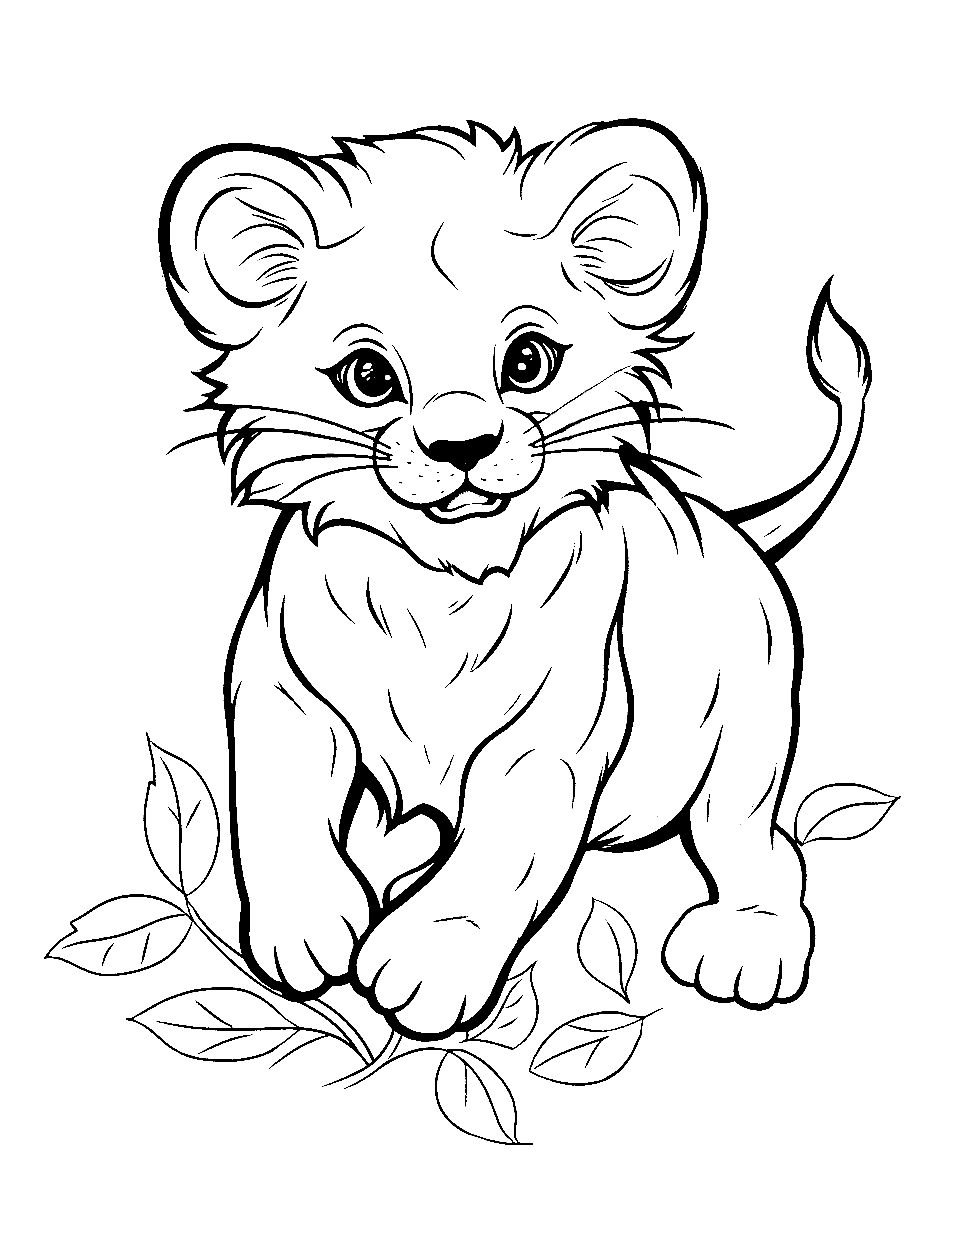 Playful Pounce Coloring Page - A lion cub mid-air, trying to pounce on a leaf.